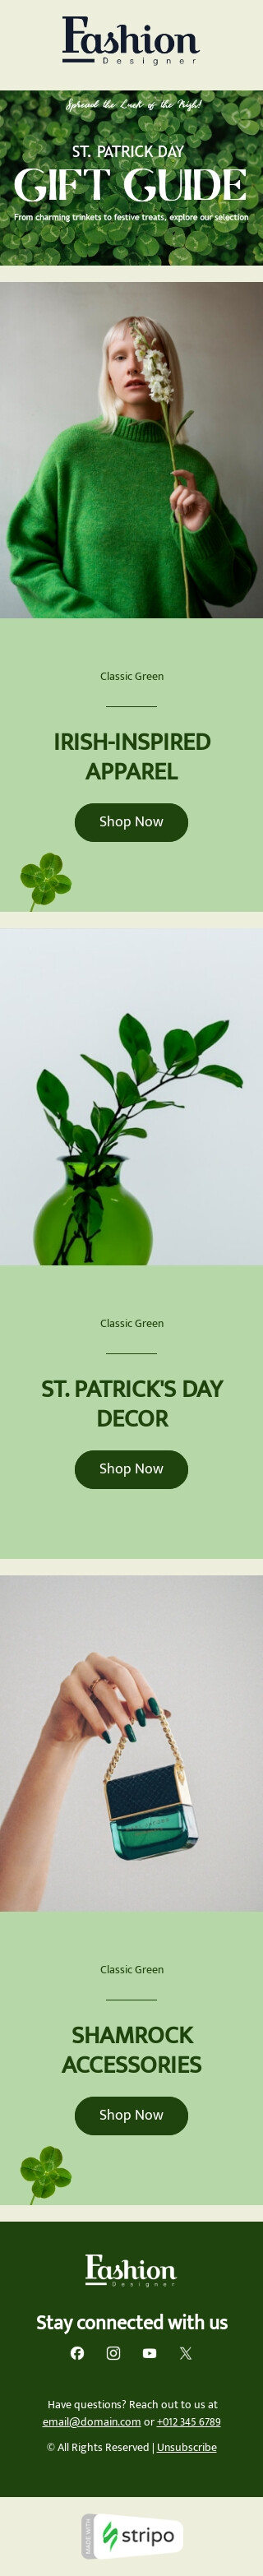 St. Patrick's Day email template "Shamrock Accessories" for fashion industry mobile view